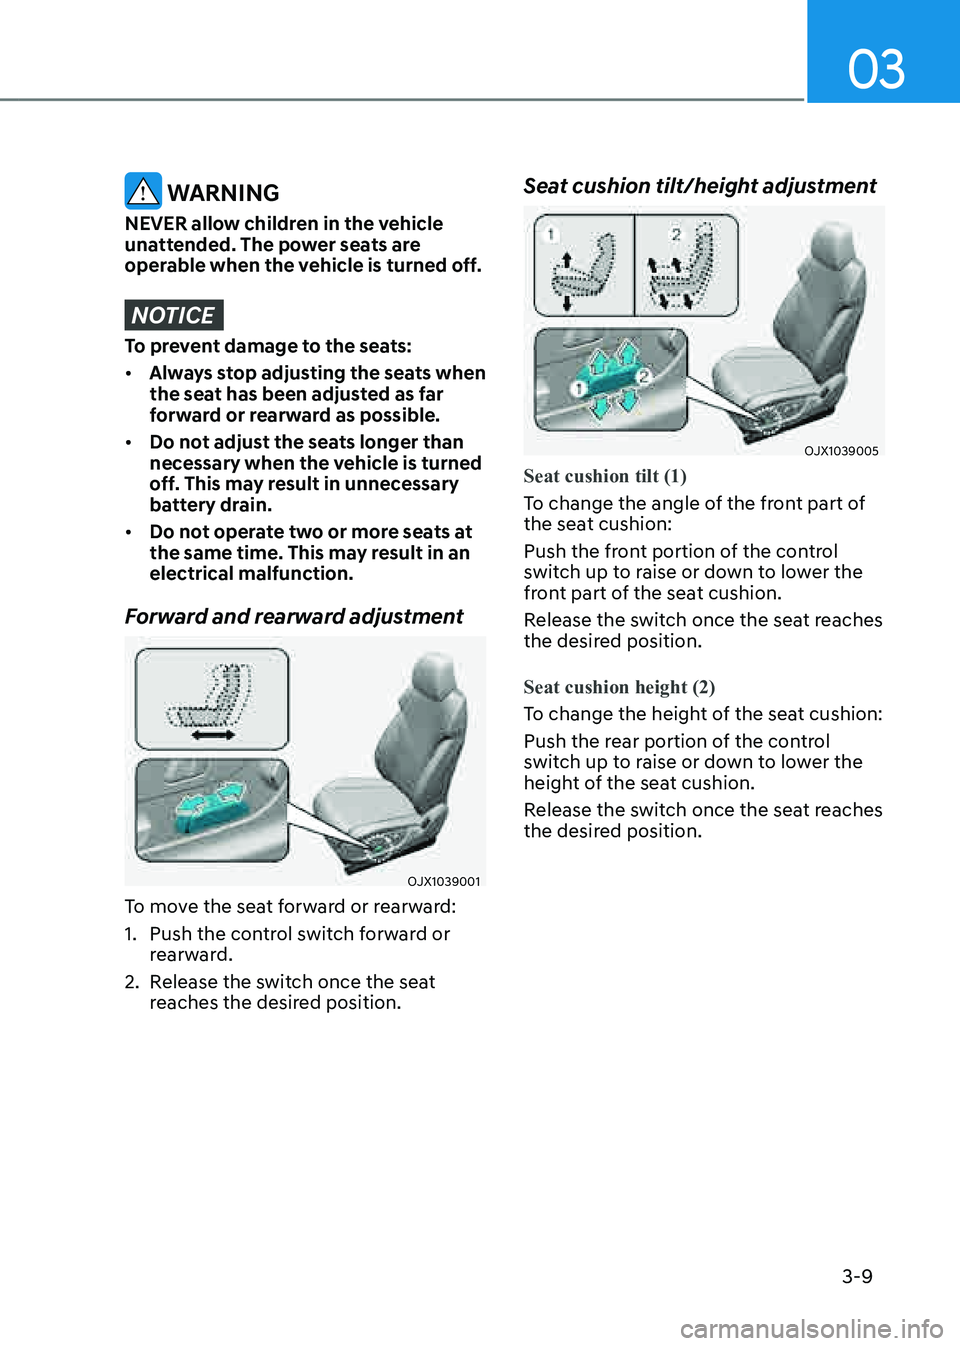 GENESIS GV80 2021  Owners Manual 03
3-9
 WARNING
NEVER allow children in the vehicle 
unattended. The power seats are 
operable when the vehicle is turned off.
NOTICE
To prevent damage to the seats:
• Always stop adjusting the seat